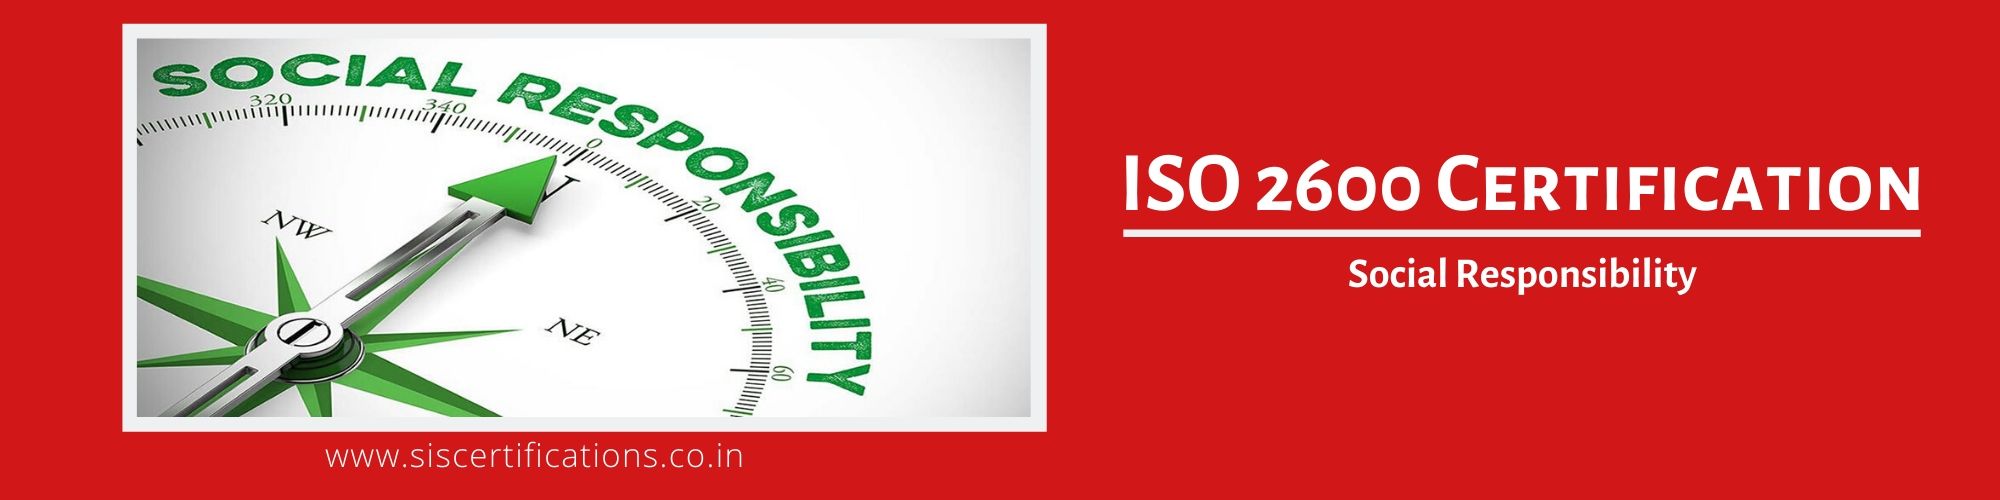 ISO 26000 Certification, ISO 26000 Certification